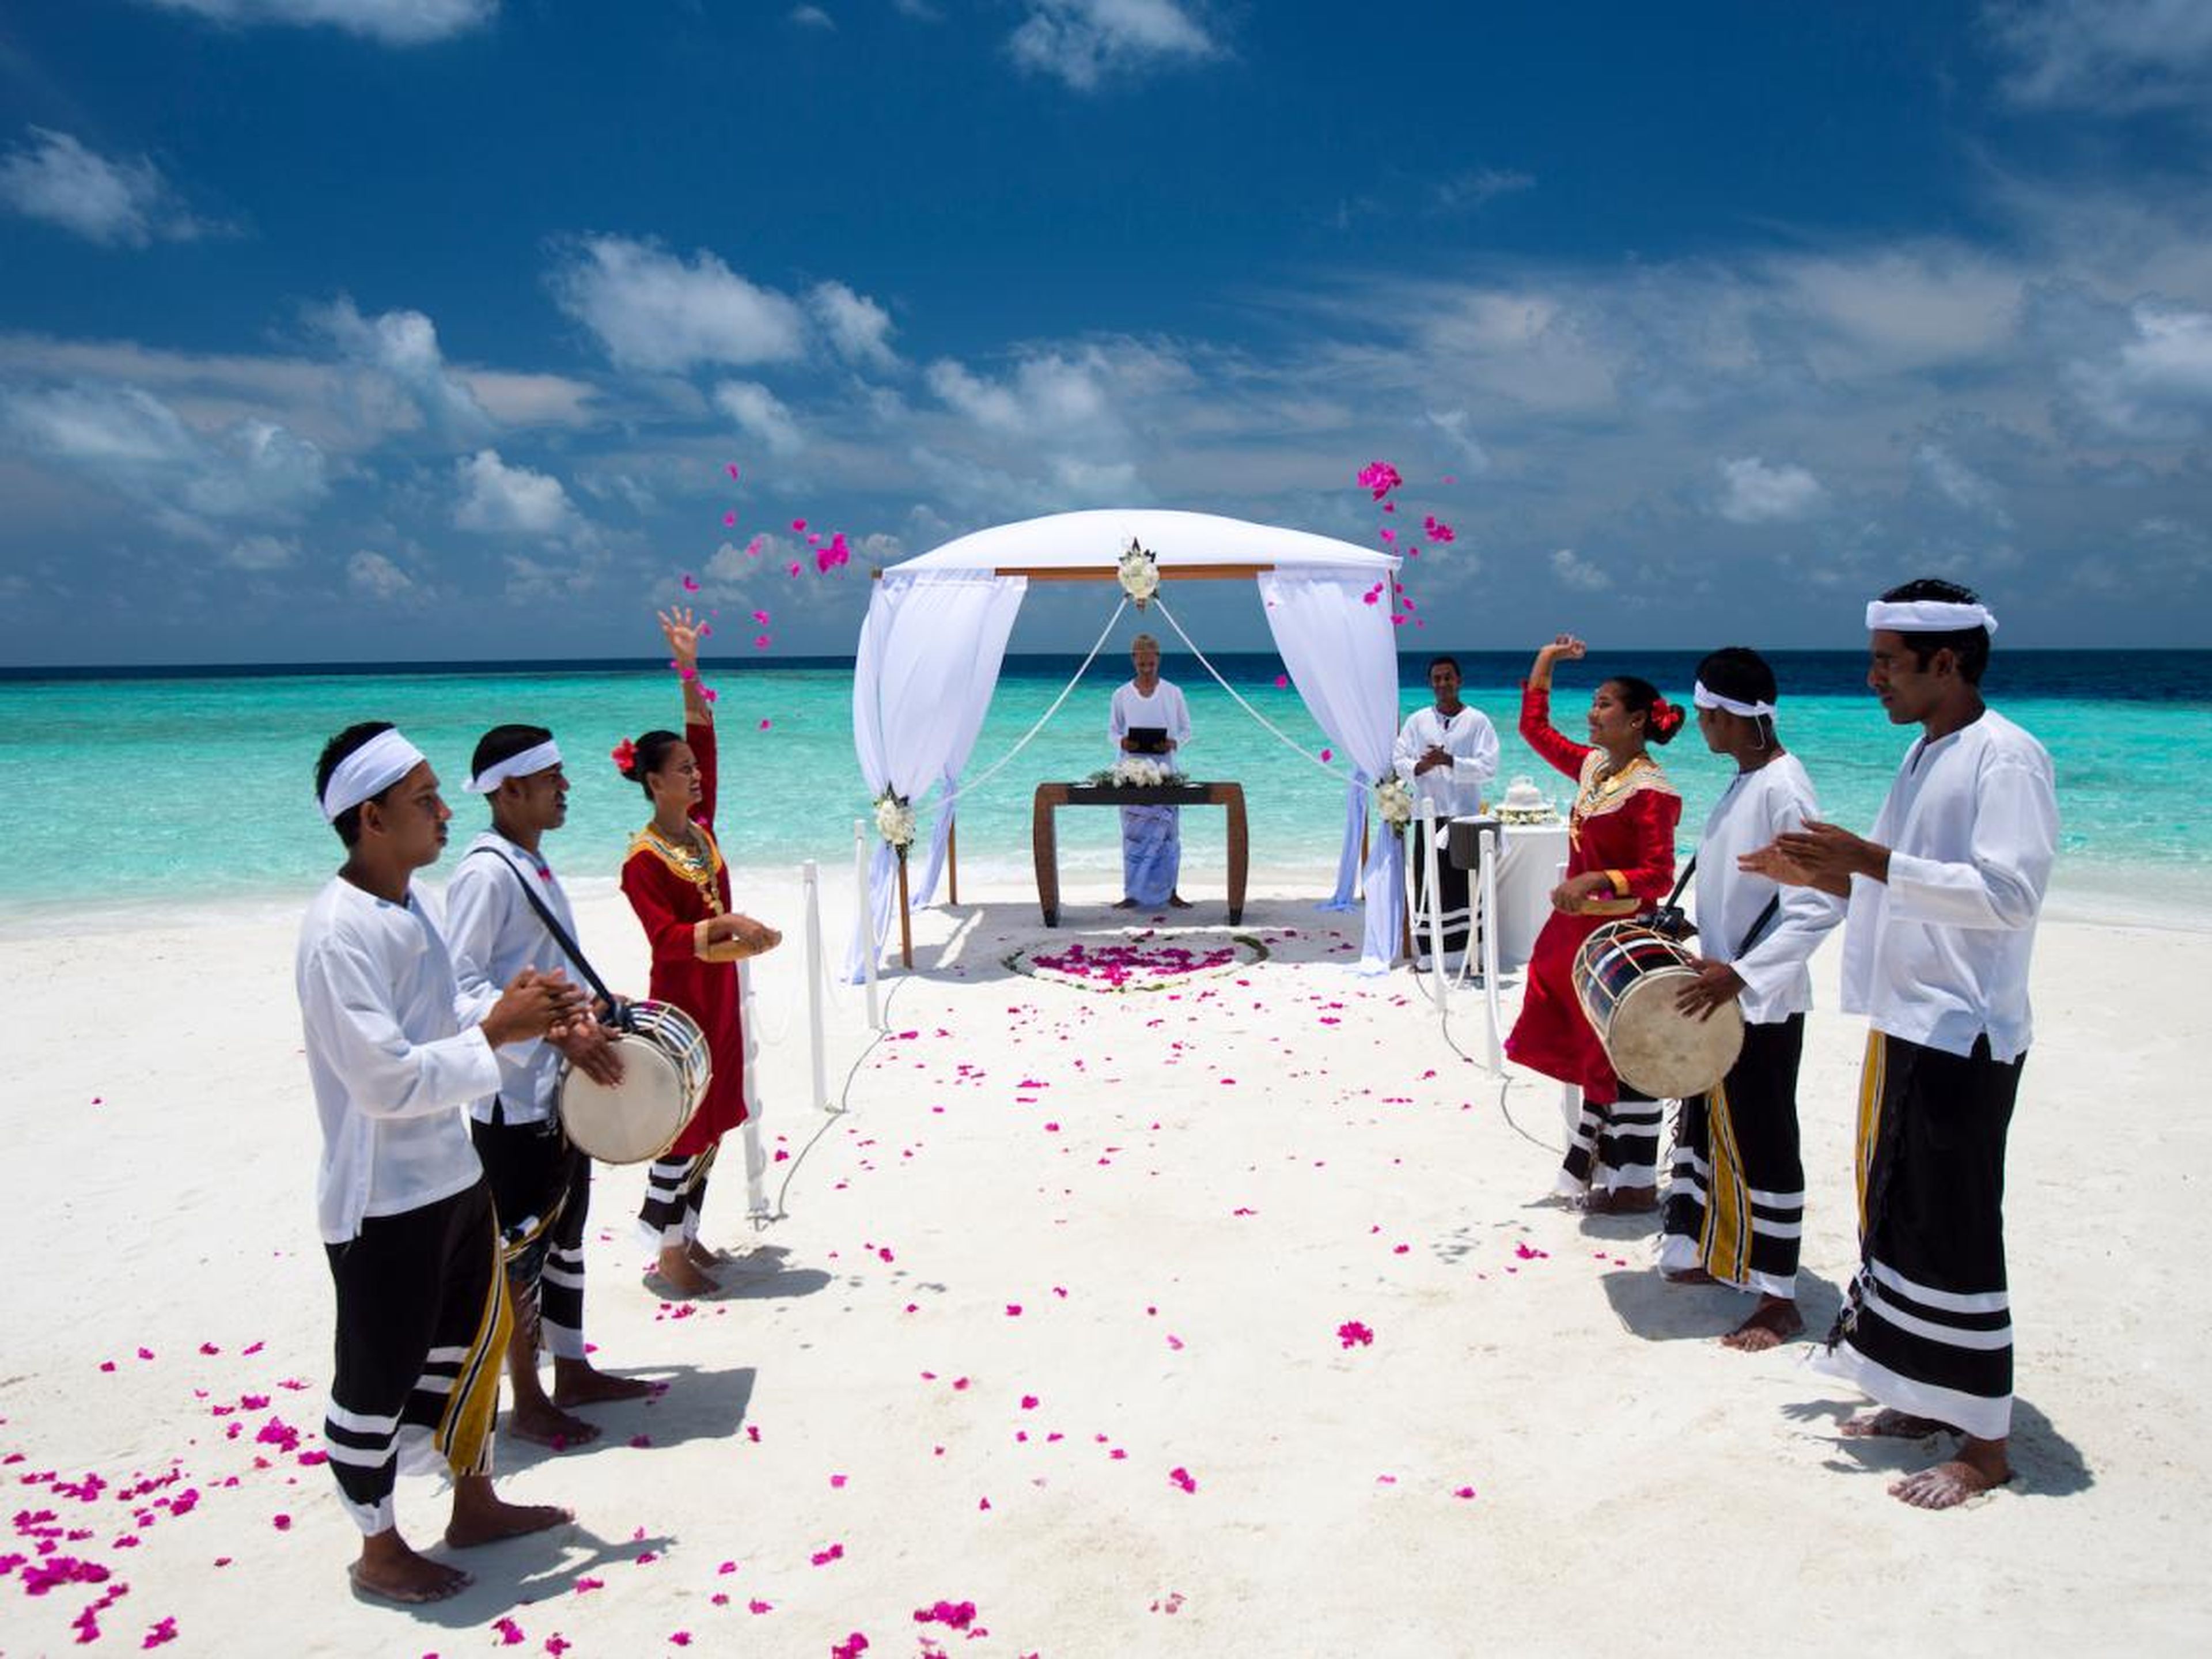 Baros also offers private vow renewal ceremonies by the sea, complete with a traditional Maldivian Bodu Beru dance procession, a traditional sarong for the bride and Baros polo shirt for the groom, a wedding cake, a memorial palm